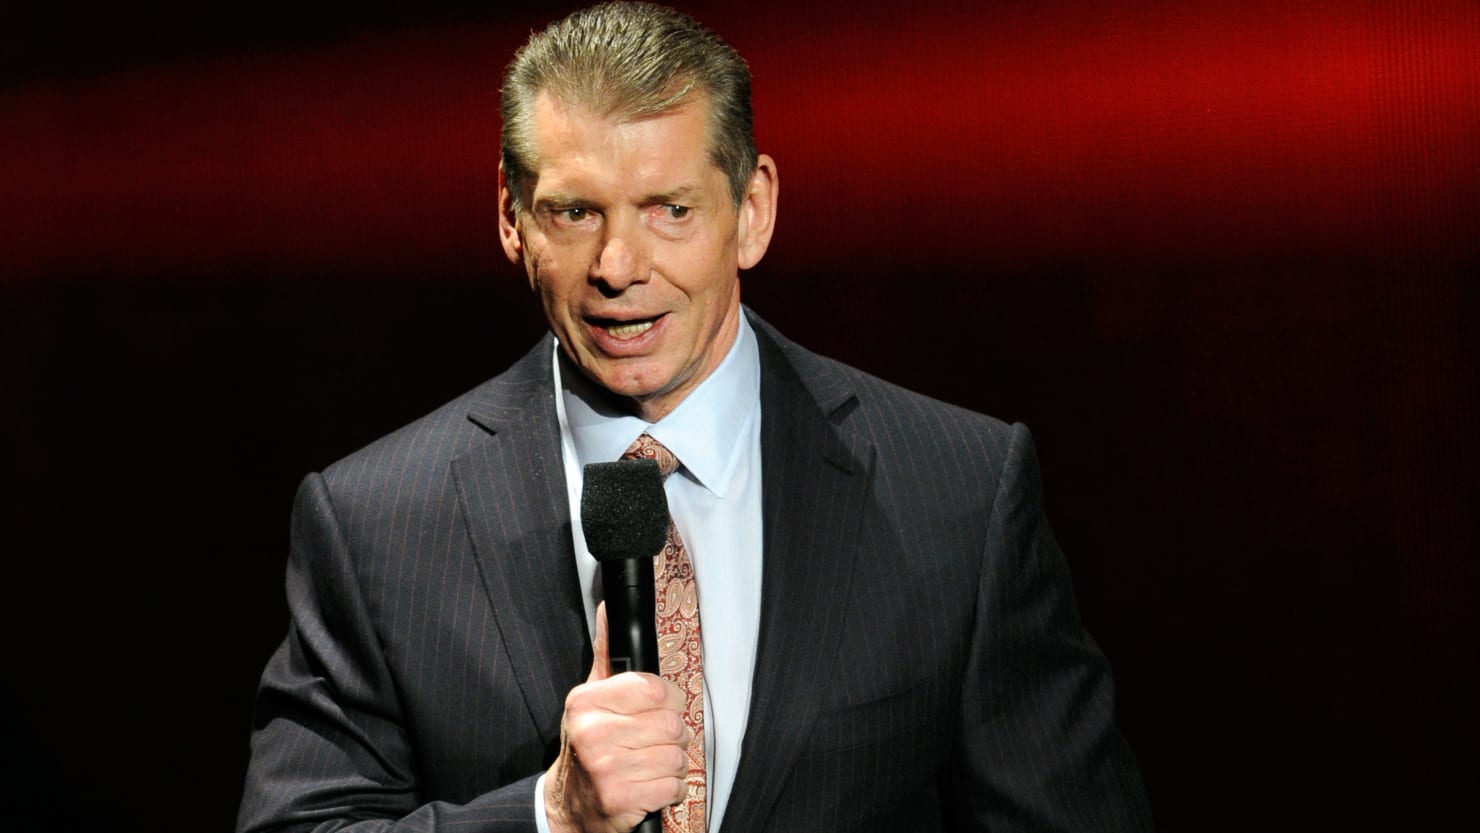 The Turbulent Reign of Vince McMahon: An Insider's Tale of WWE's Creative Struggles